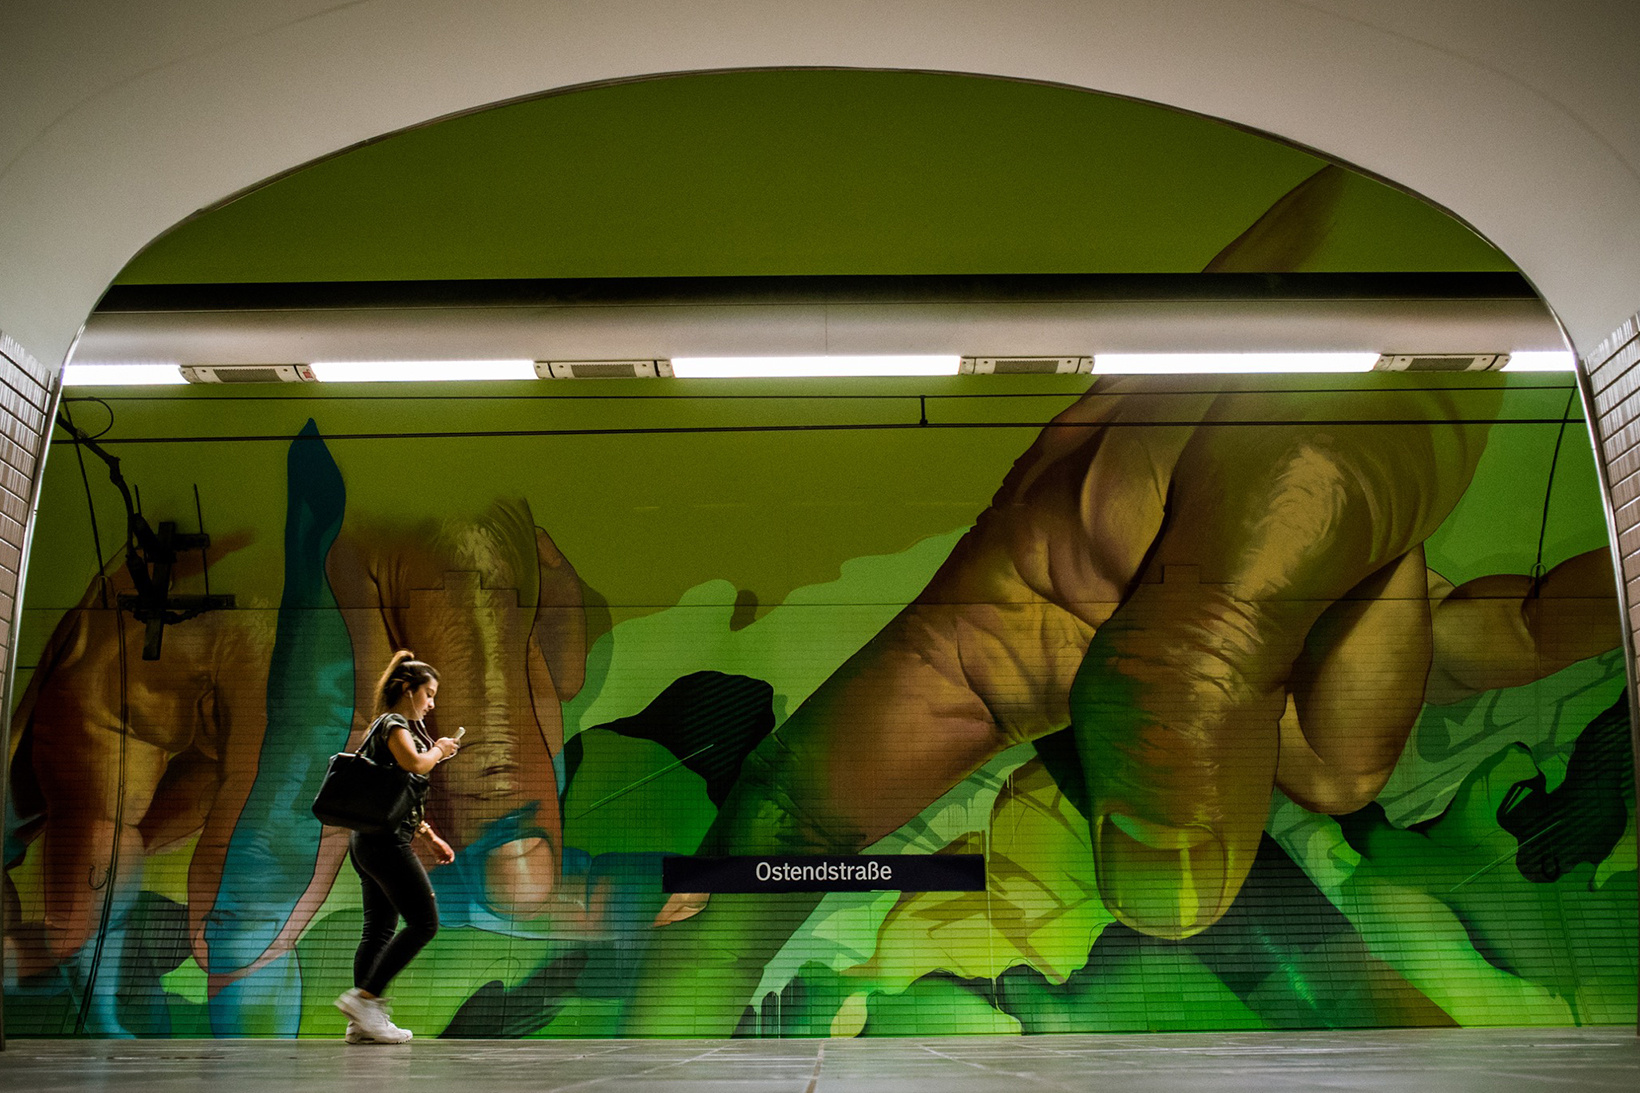 40-day subterranean project in Frankfurt - by DOES